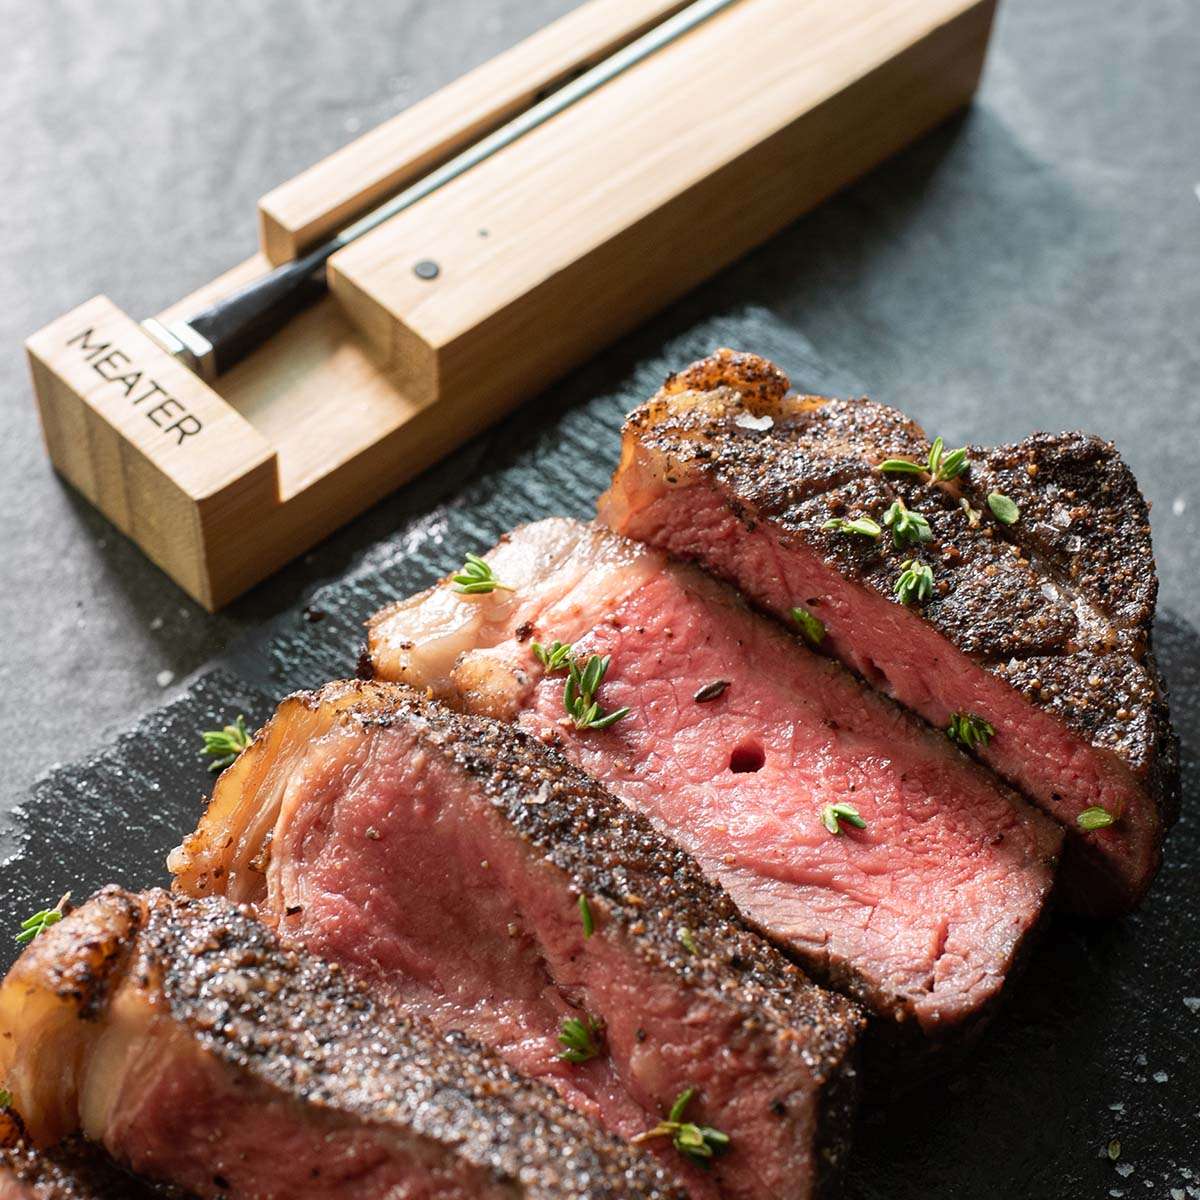 https://www.theoutdoorstore.co/wp-content/uploads/2021/12/meater-original-meat-thermometer-steak-the-outdoor-store.jpg